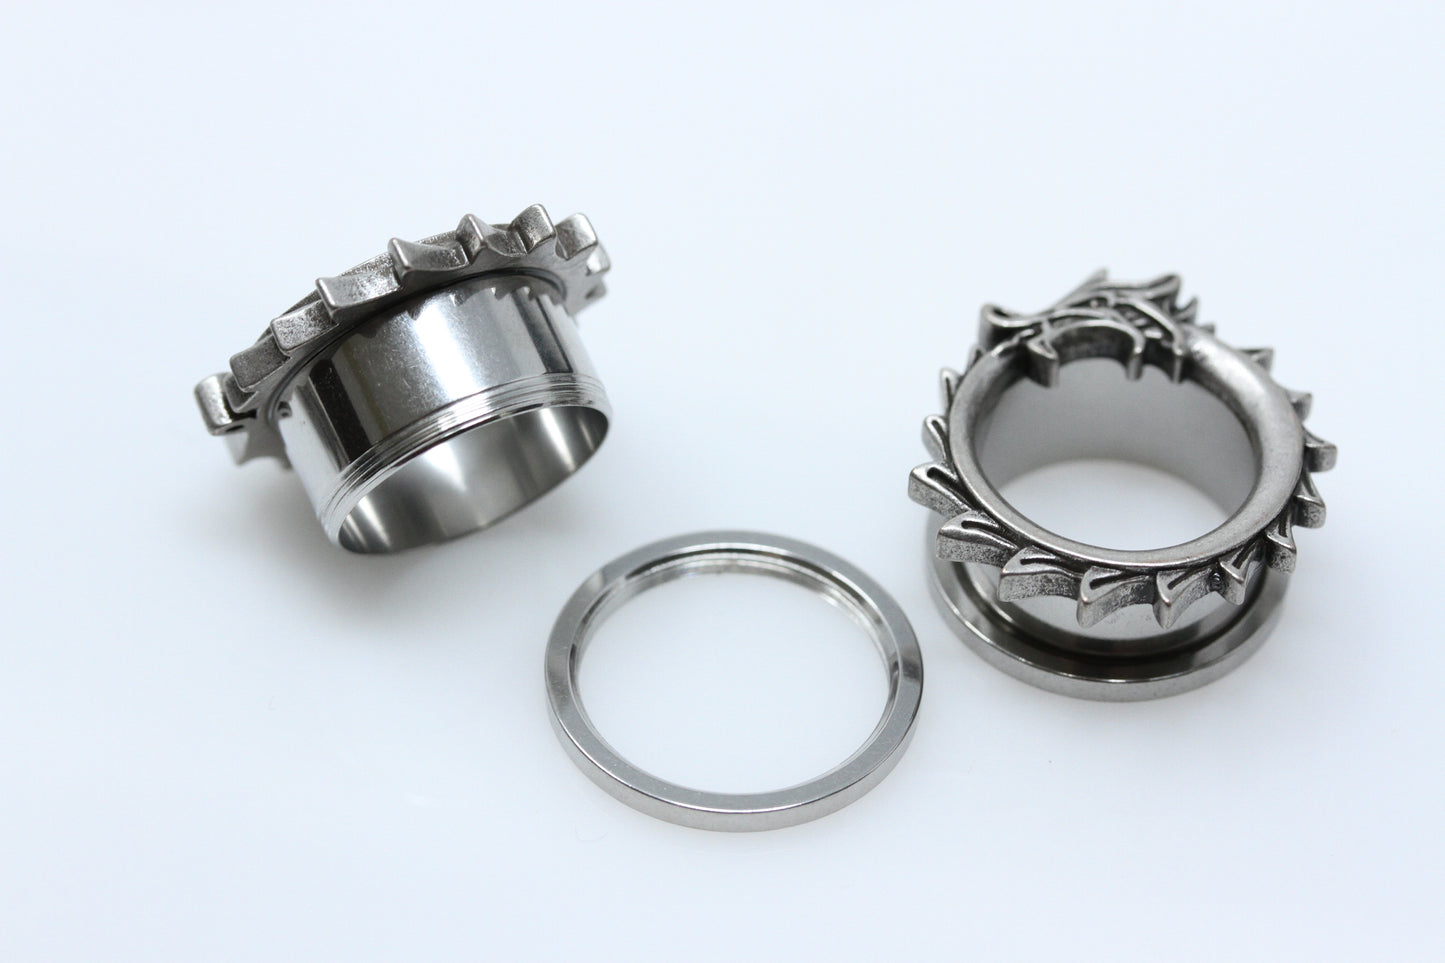 Dragon Stainless Steel Tunnels - Screw on Plugs (Pair) - PSS78